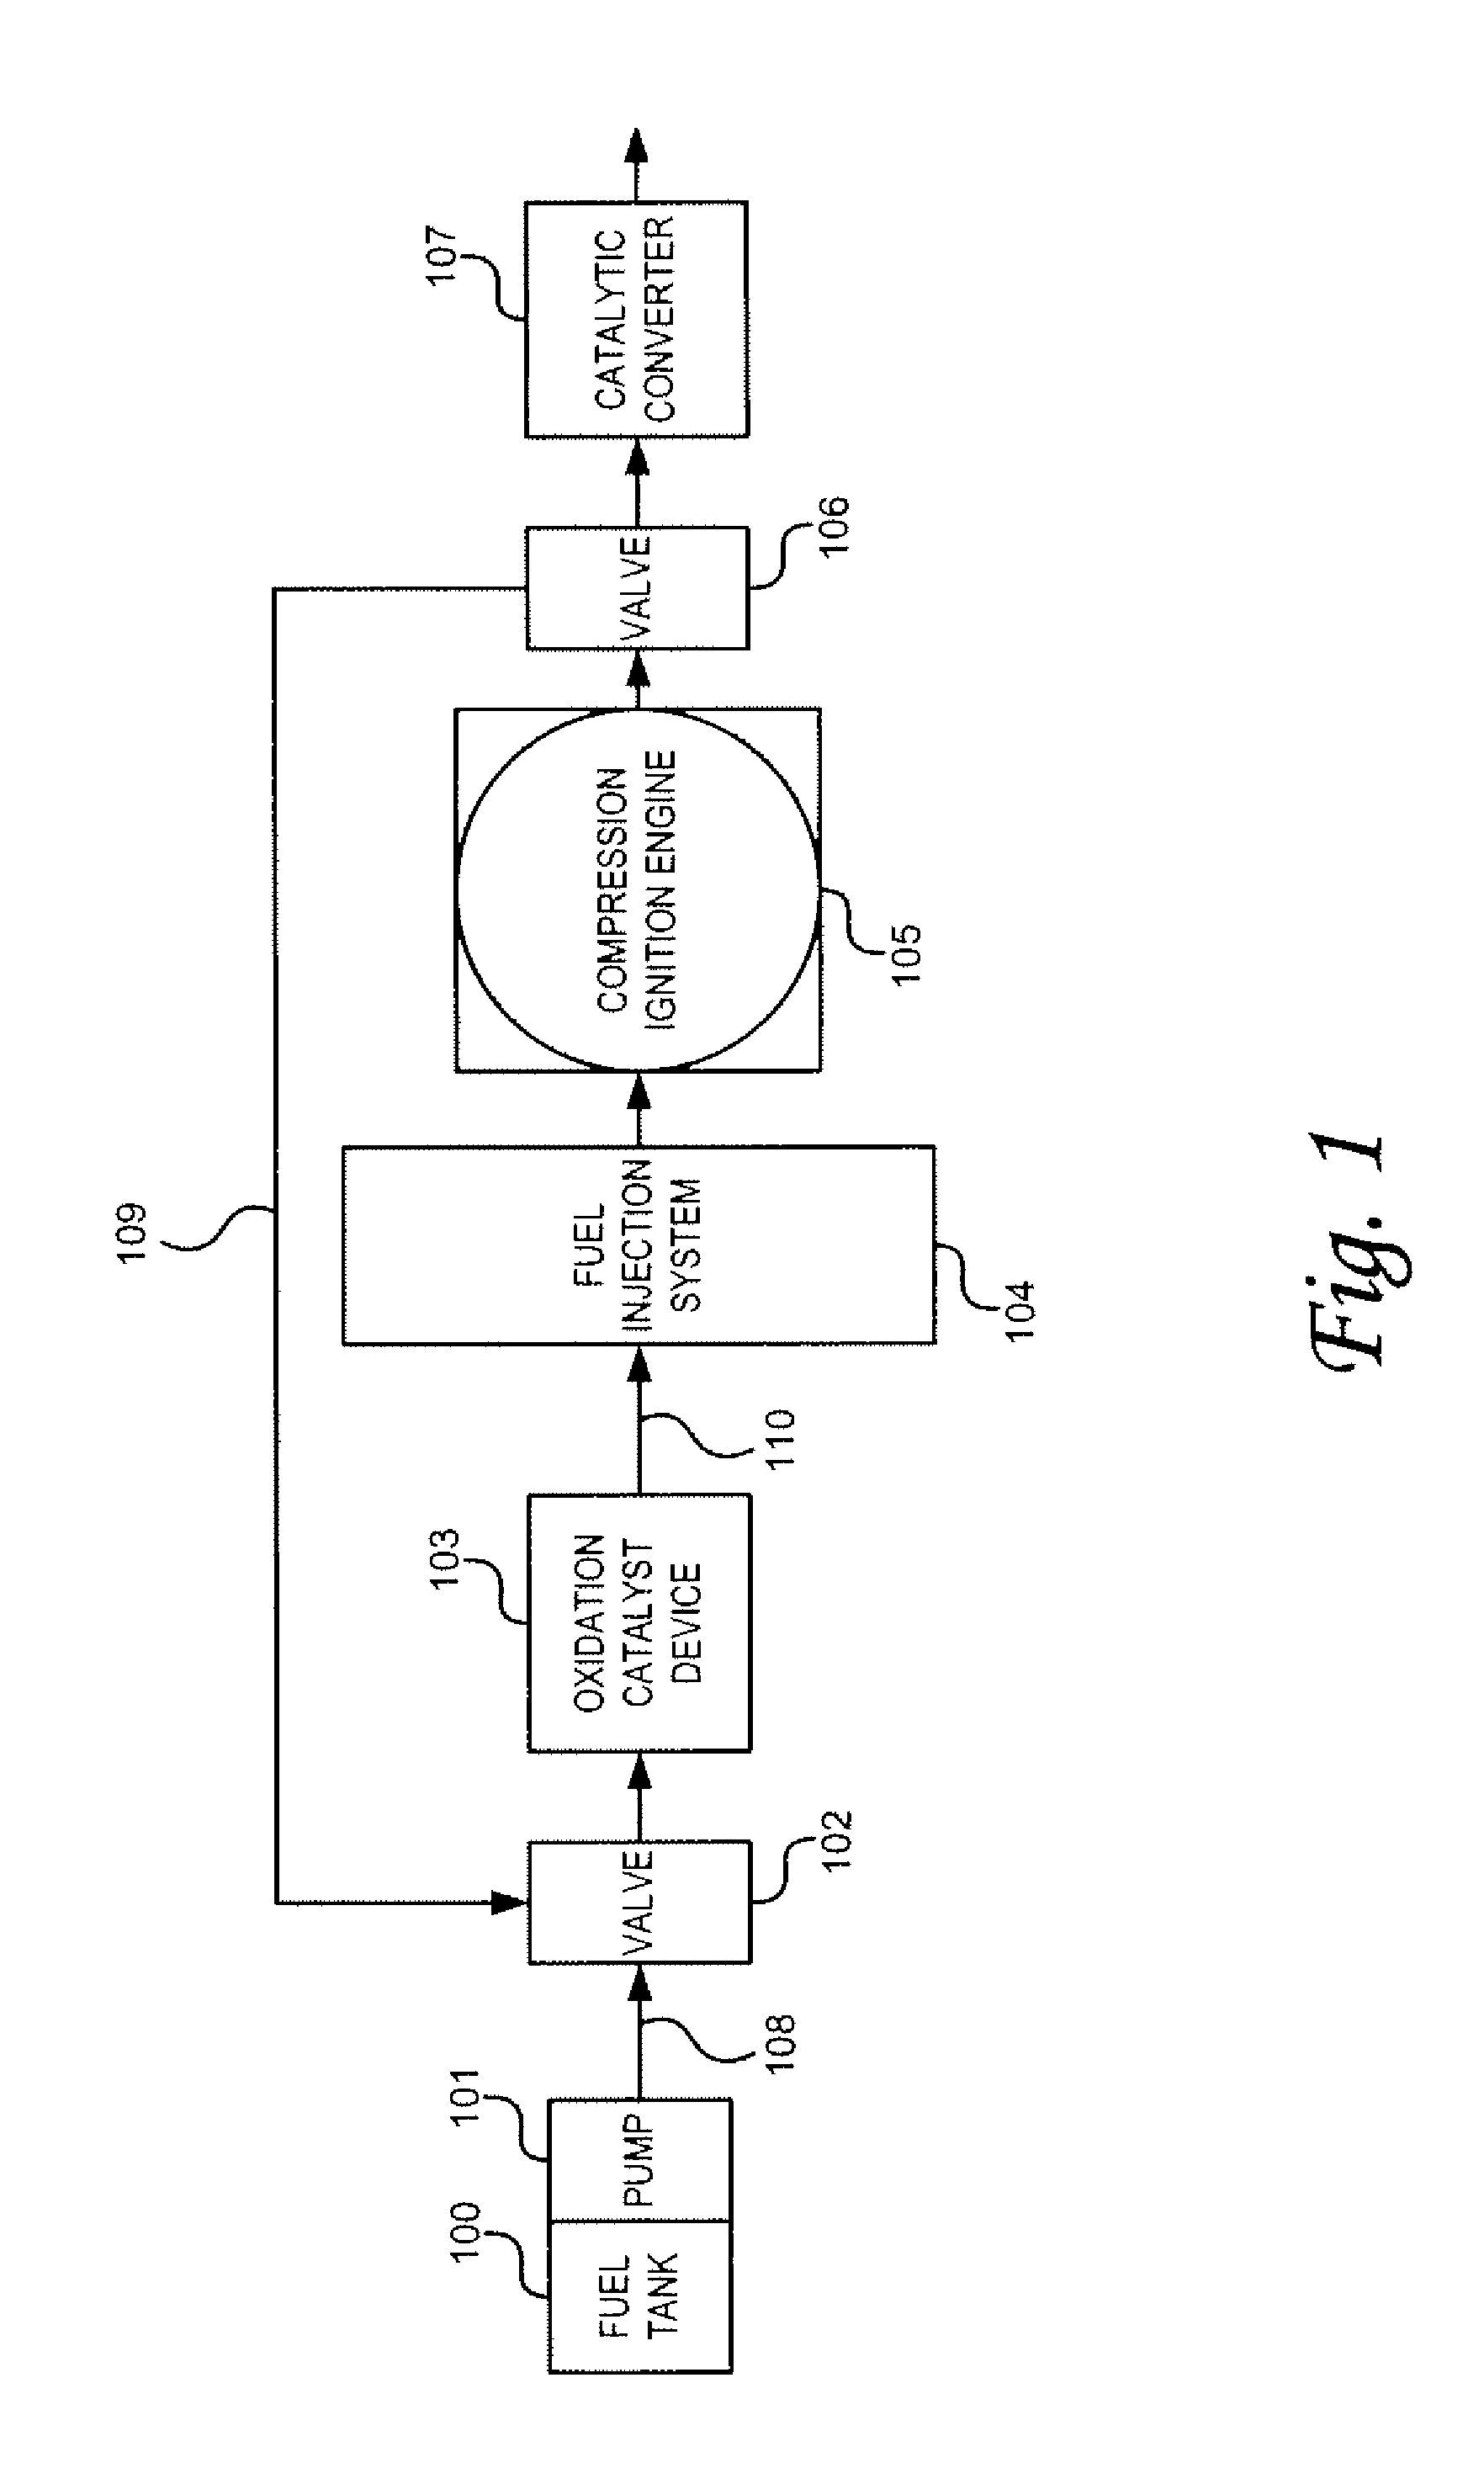 Catalytic fuel oxidation system using exhaust gas